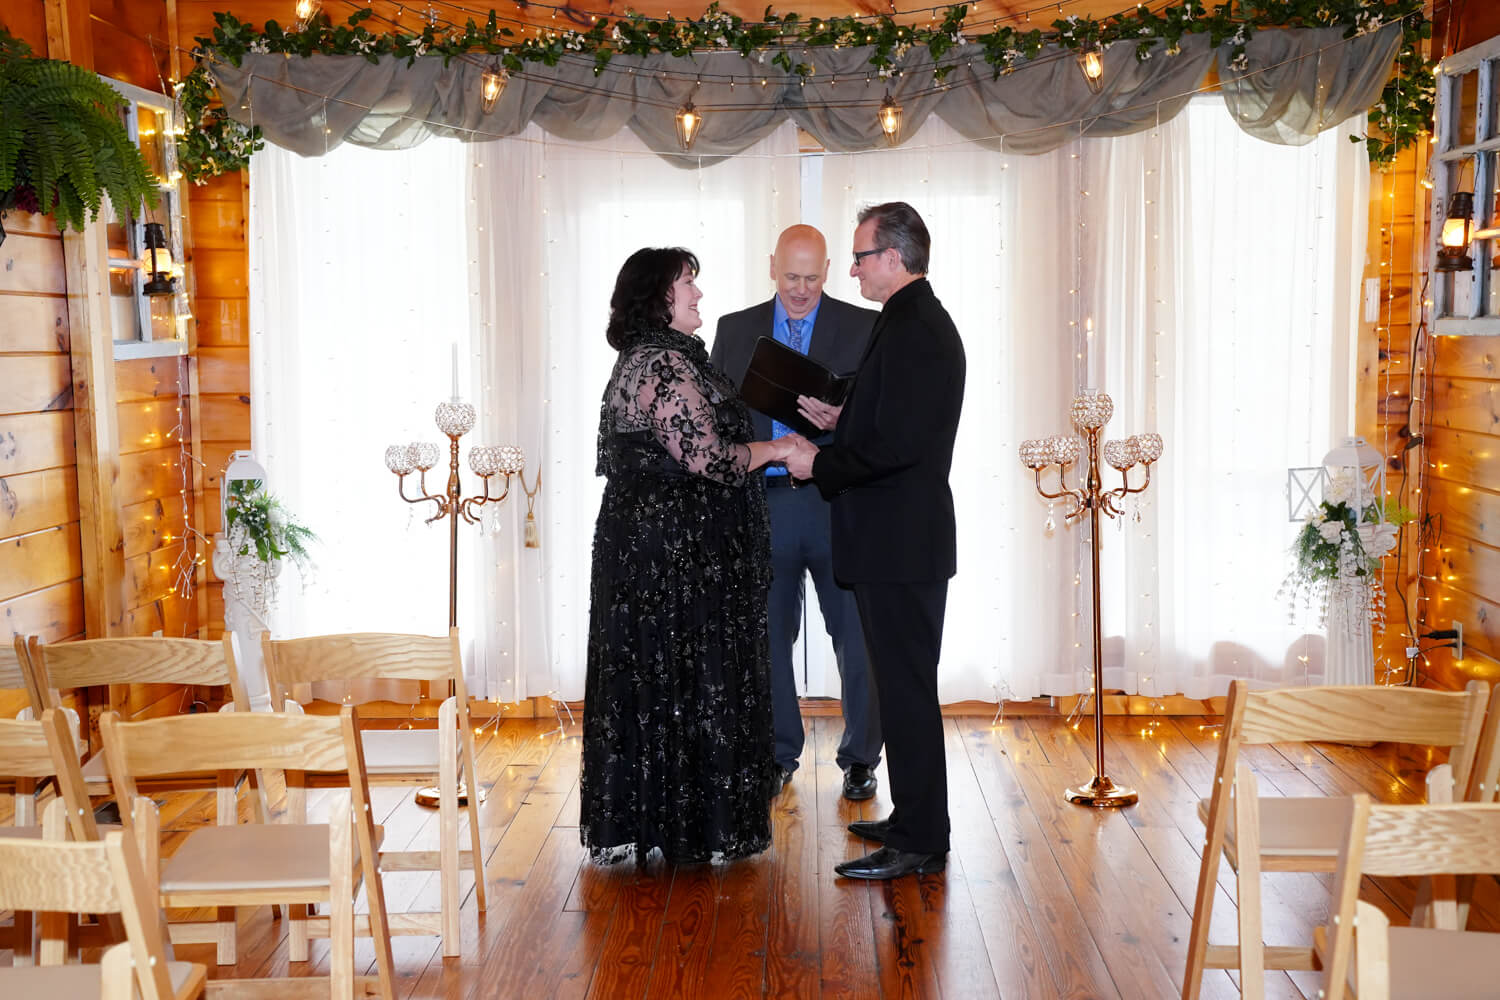 Couple getting married in black wedding attire in a wedding chapel with string lights and candles